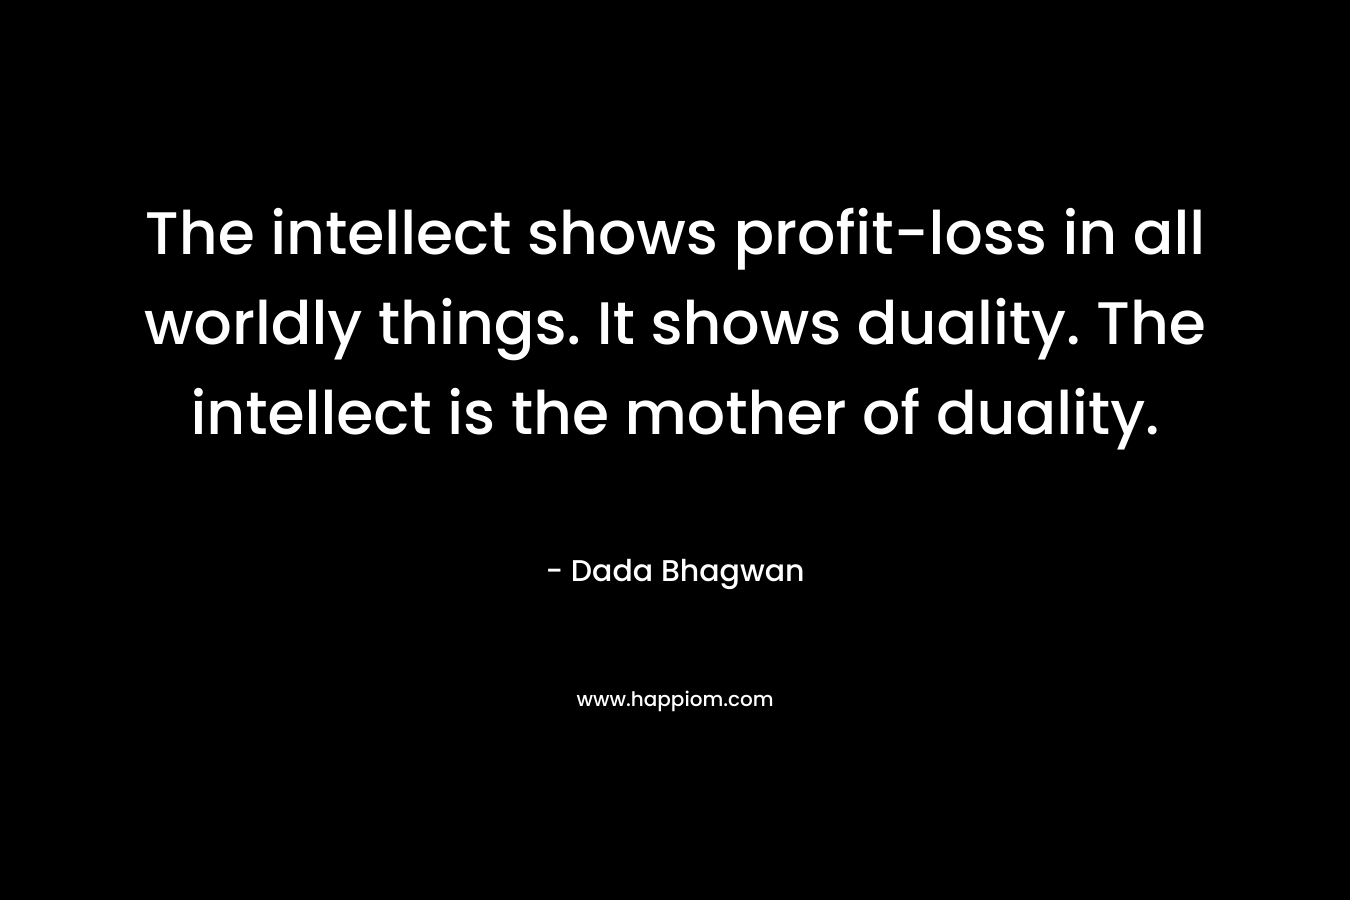 The intellect shows profit-loss in all worldly things. It shows duality. The intellect is the mother of duality. – Dada Bhagwan